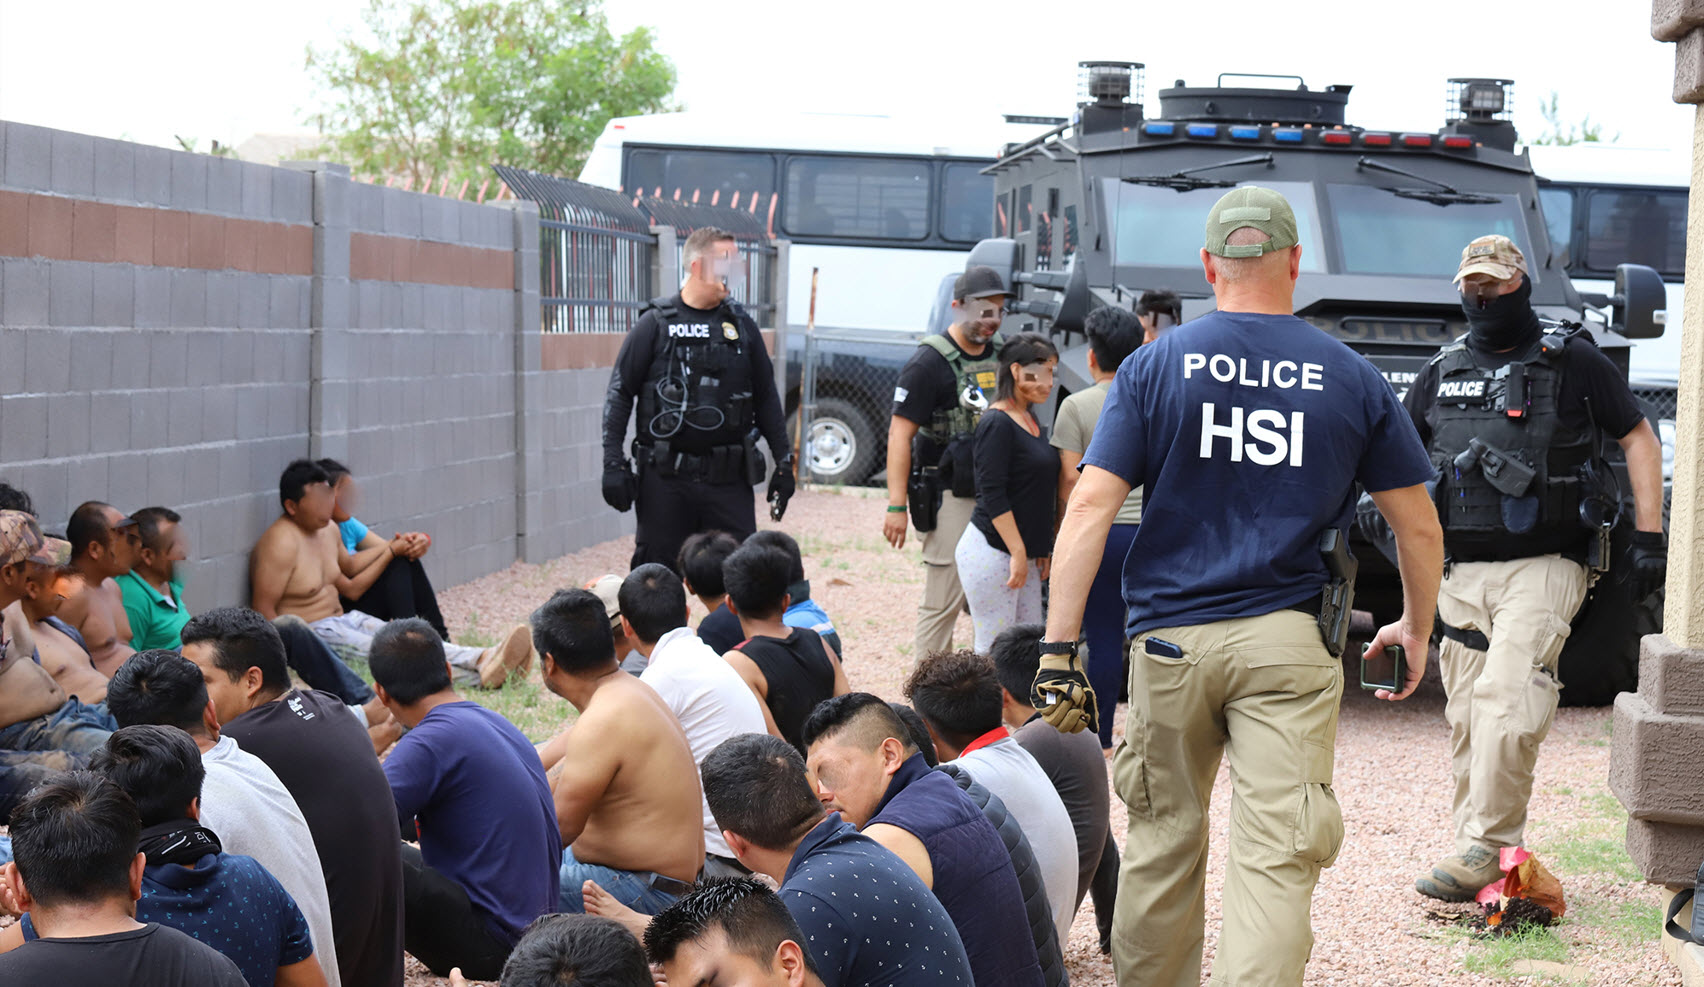 3 arrested on human smuggling charges following HSI Douglas, multiagency investigation